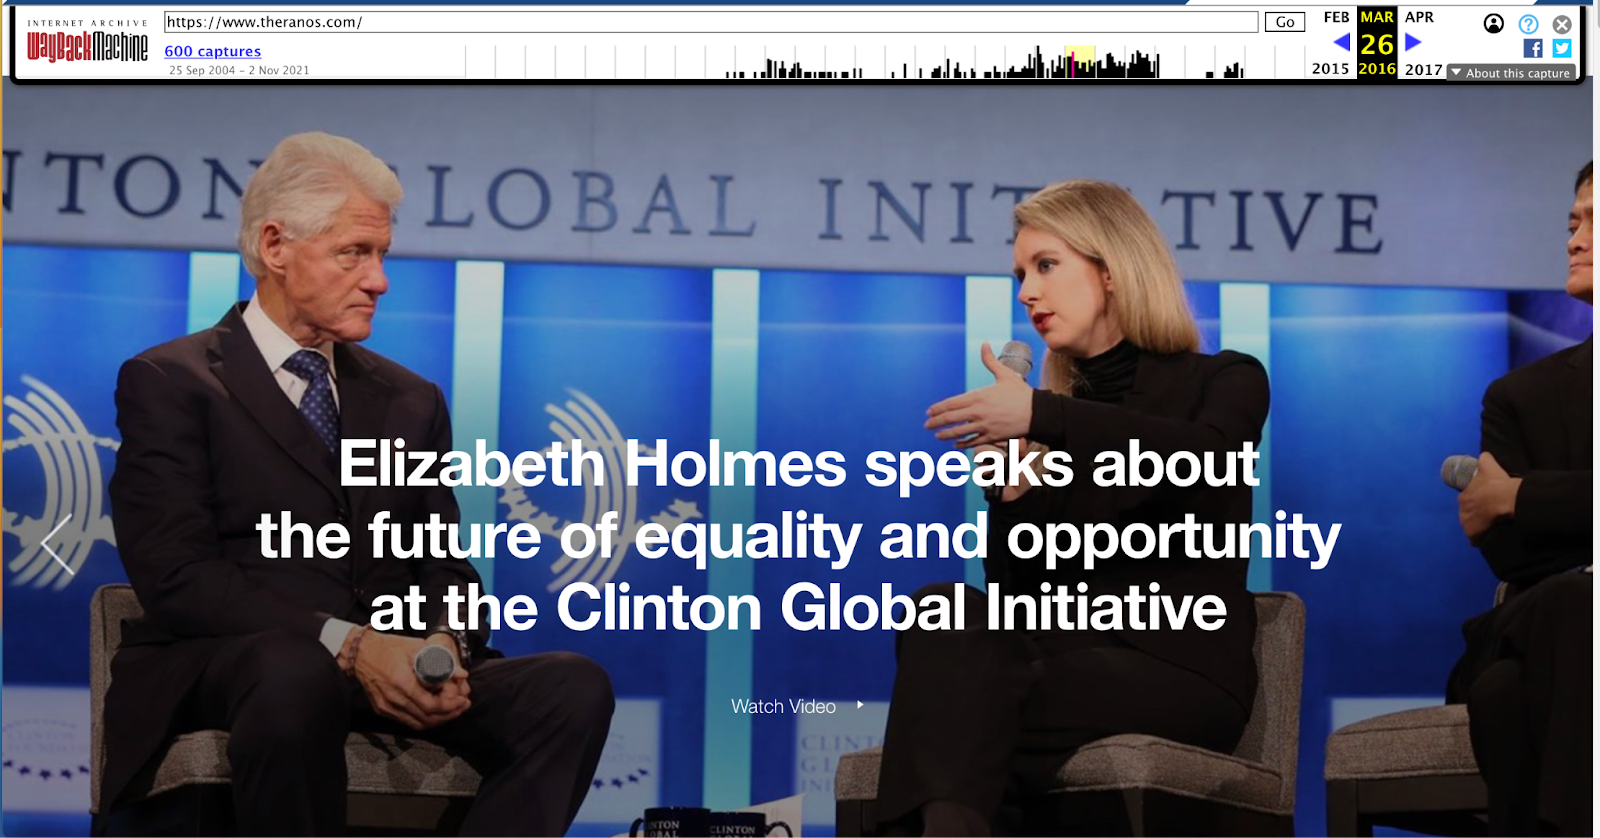 Screenshot of extinct Theranos homepage slider image featuring Bill Clinton speaking with Elizabeth Holmes